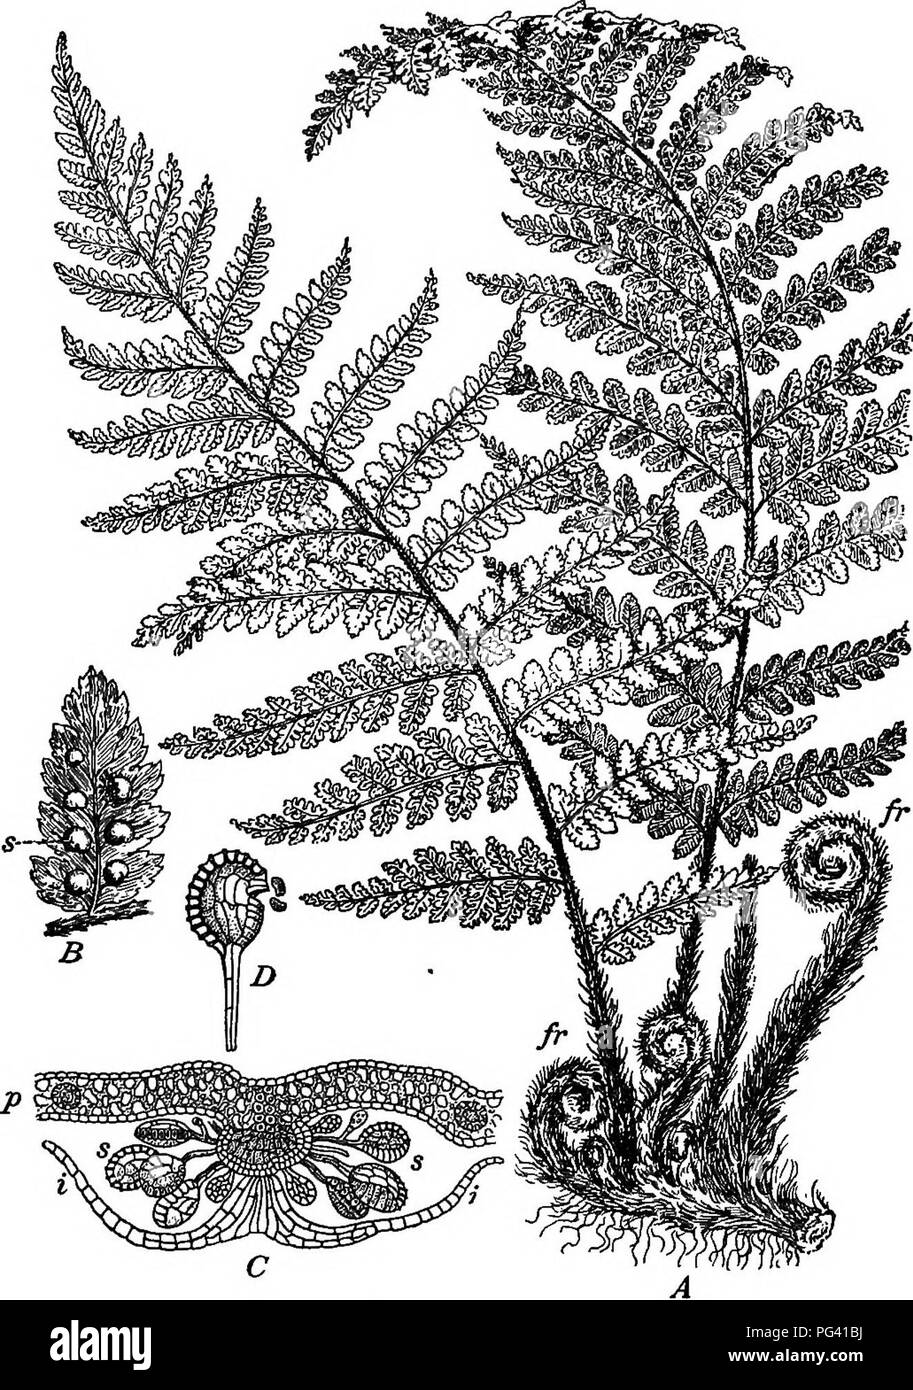 . Foundations of botany. Botany; Botany. 2;88 FOUNDATIONS OP BOTANY. Fia. 210.—Spore-Plamt of a Tern (Aspidium MUx-mas). ^, part of rootstock and fronds, not quite one-sixth natural size ; fr, yoting fronds unrolling; JB, under side of a pinnule, showing sori, s; C, section through a sorus at right angles to surface of leaf, showing indusium, i, and sporangia, 8; I&gt;, a sporangium discharging spores. (£ is not far from natural size. C and D are considerably magnified.). Please note that these images are extracted from scanned page images that may have been digitally enhanced for readability  Stock Photo